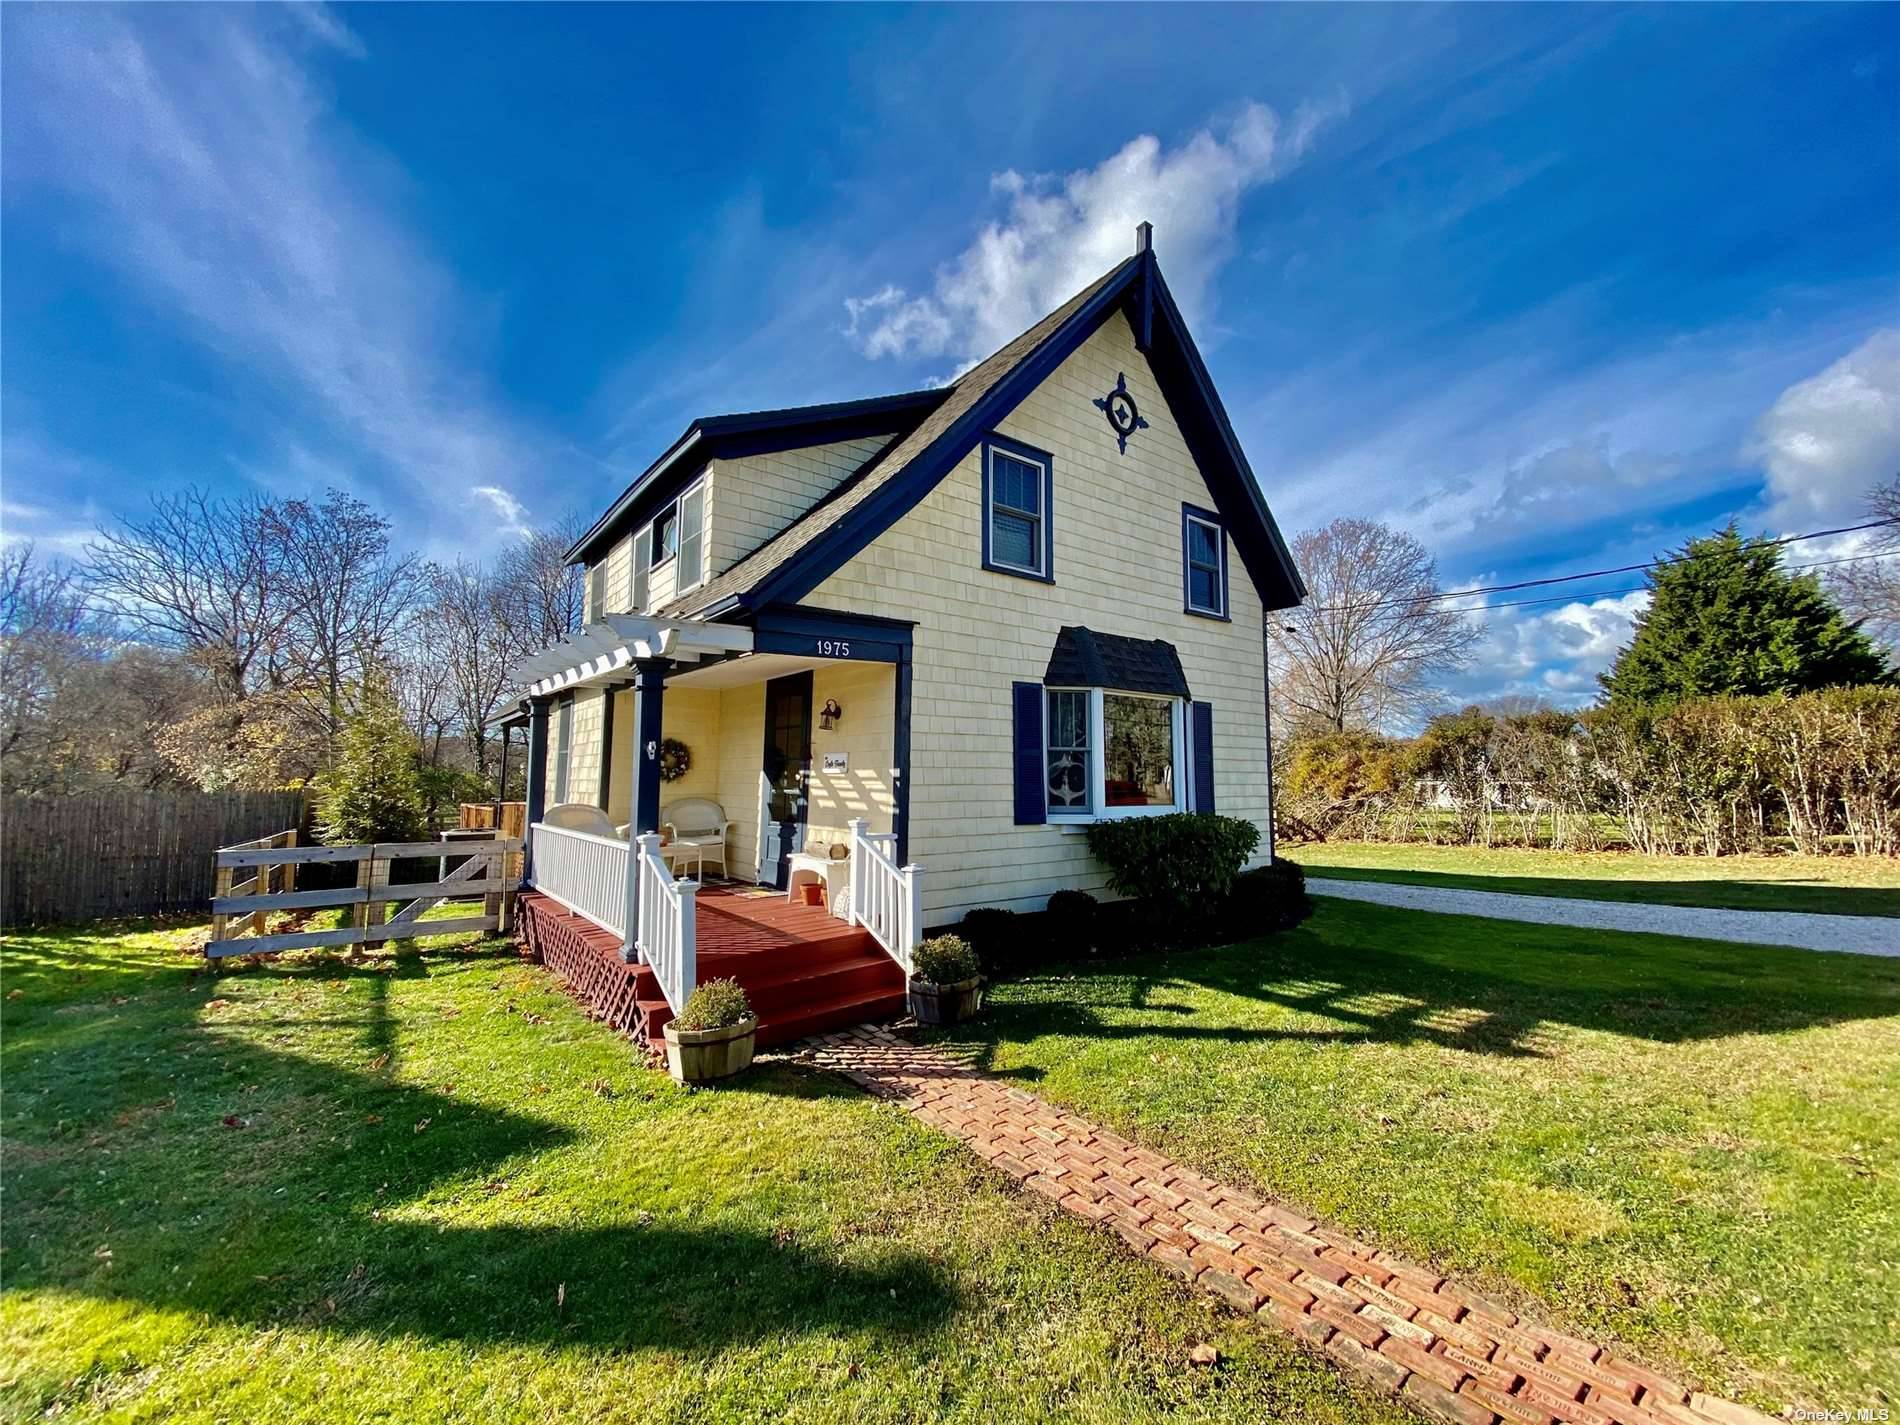 This beautifully furnished farmhouse offers you a warm welcome home on the North Fork.